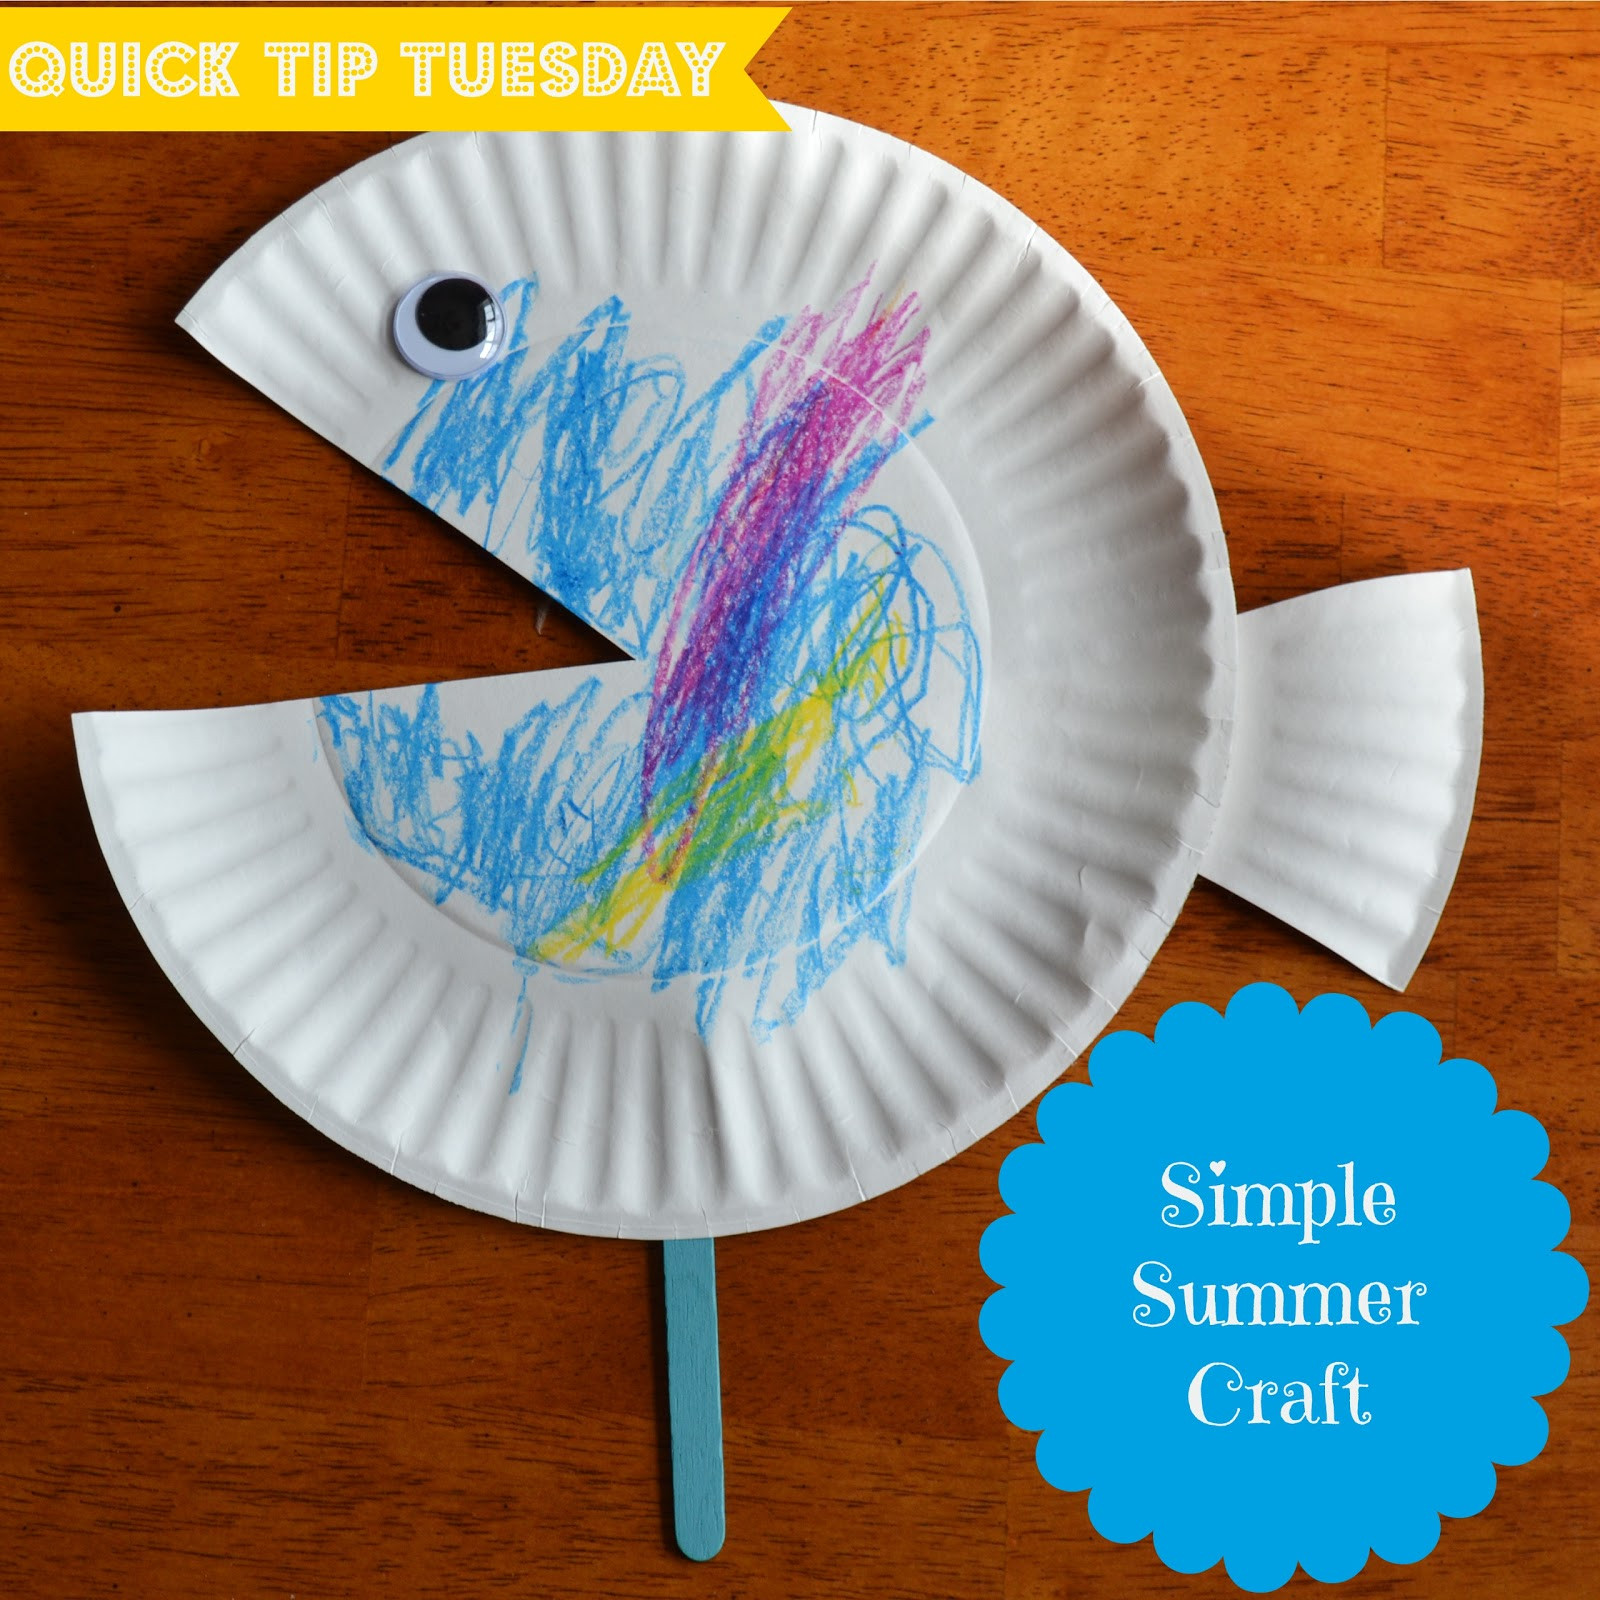 Simple Crafts For Preschool
 East Coast Mommy Quick Tip Tuesday 5 Simple Summer Craft